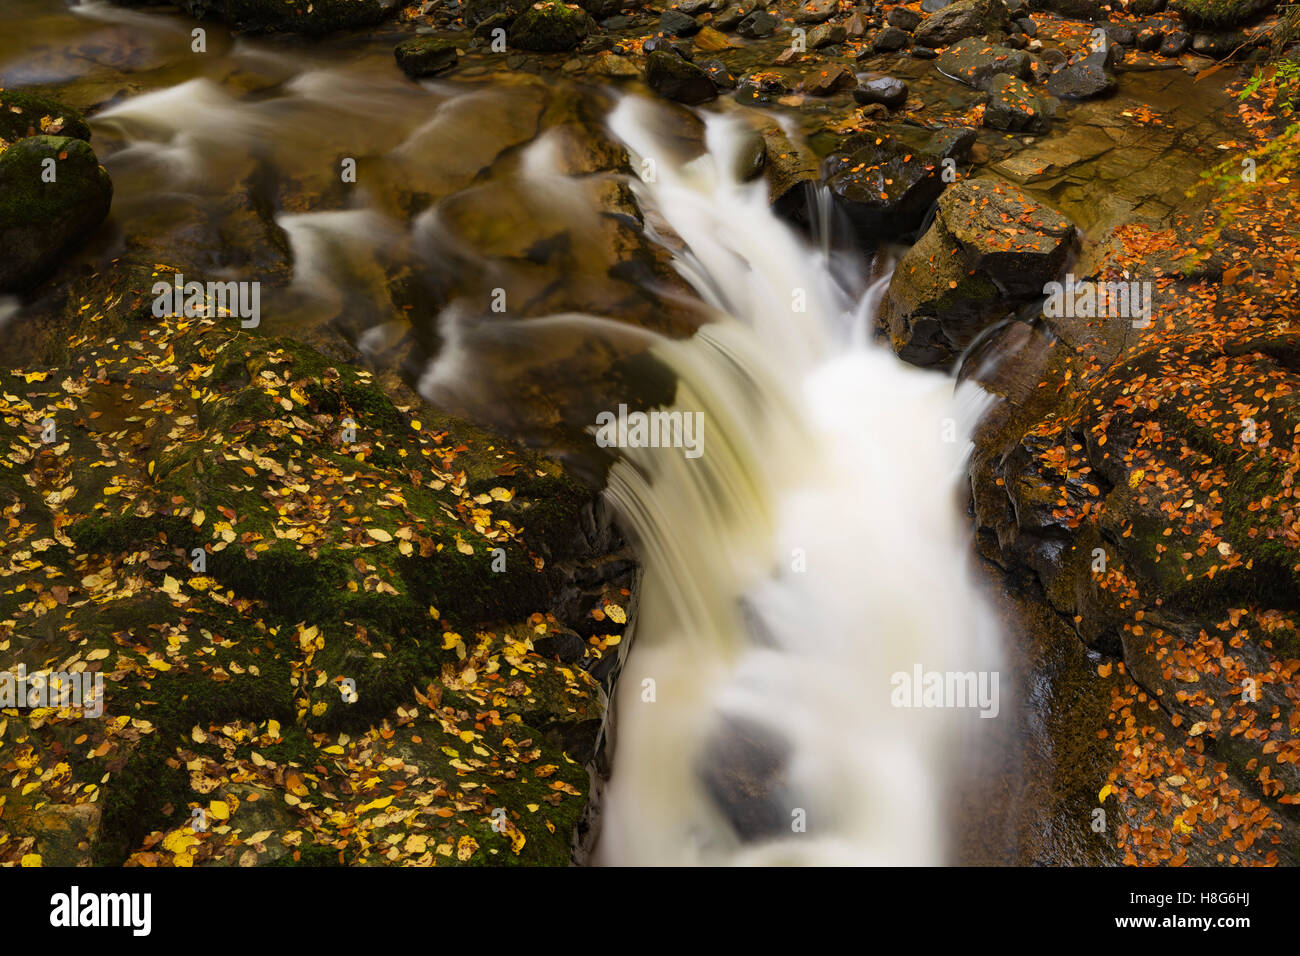 The Birks of Aberfeldy along the Moness Burn in Perthshire, Scotland, is an explosion of colour in Autumn. Stock Photo